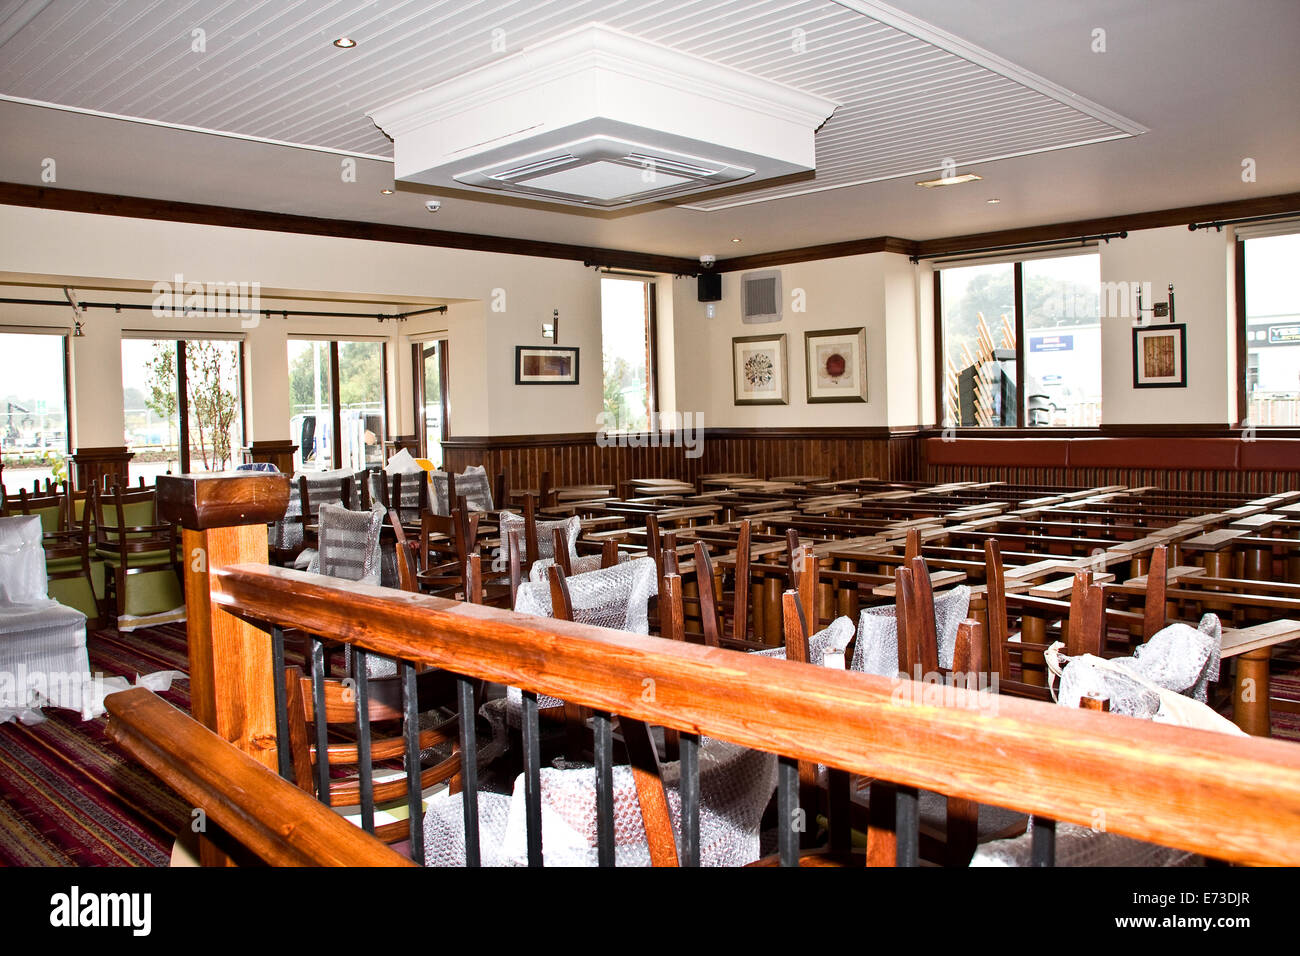 THE KINGSWAY FARM INN is a Family Pub / Restaurant owned by Greene King along Kings Cross Road in Dundee, UK Stock Photo